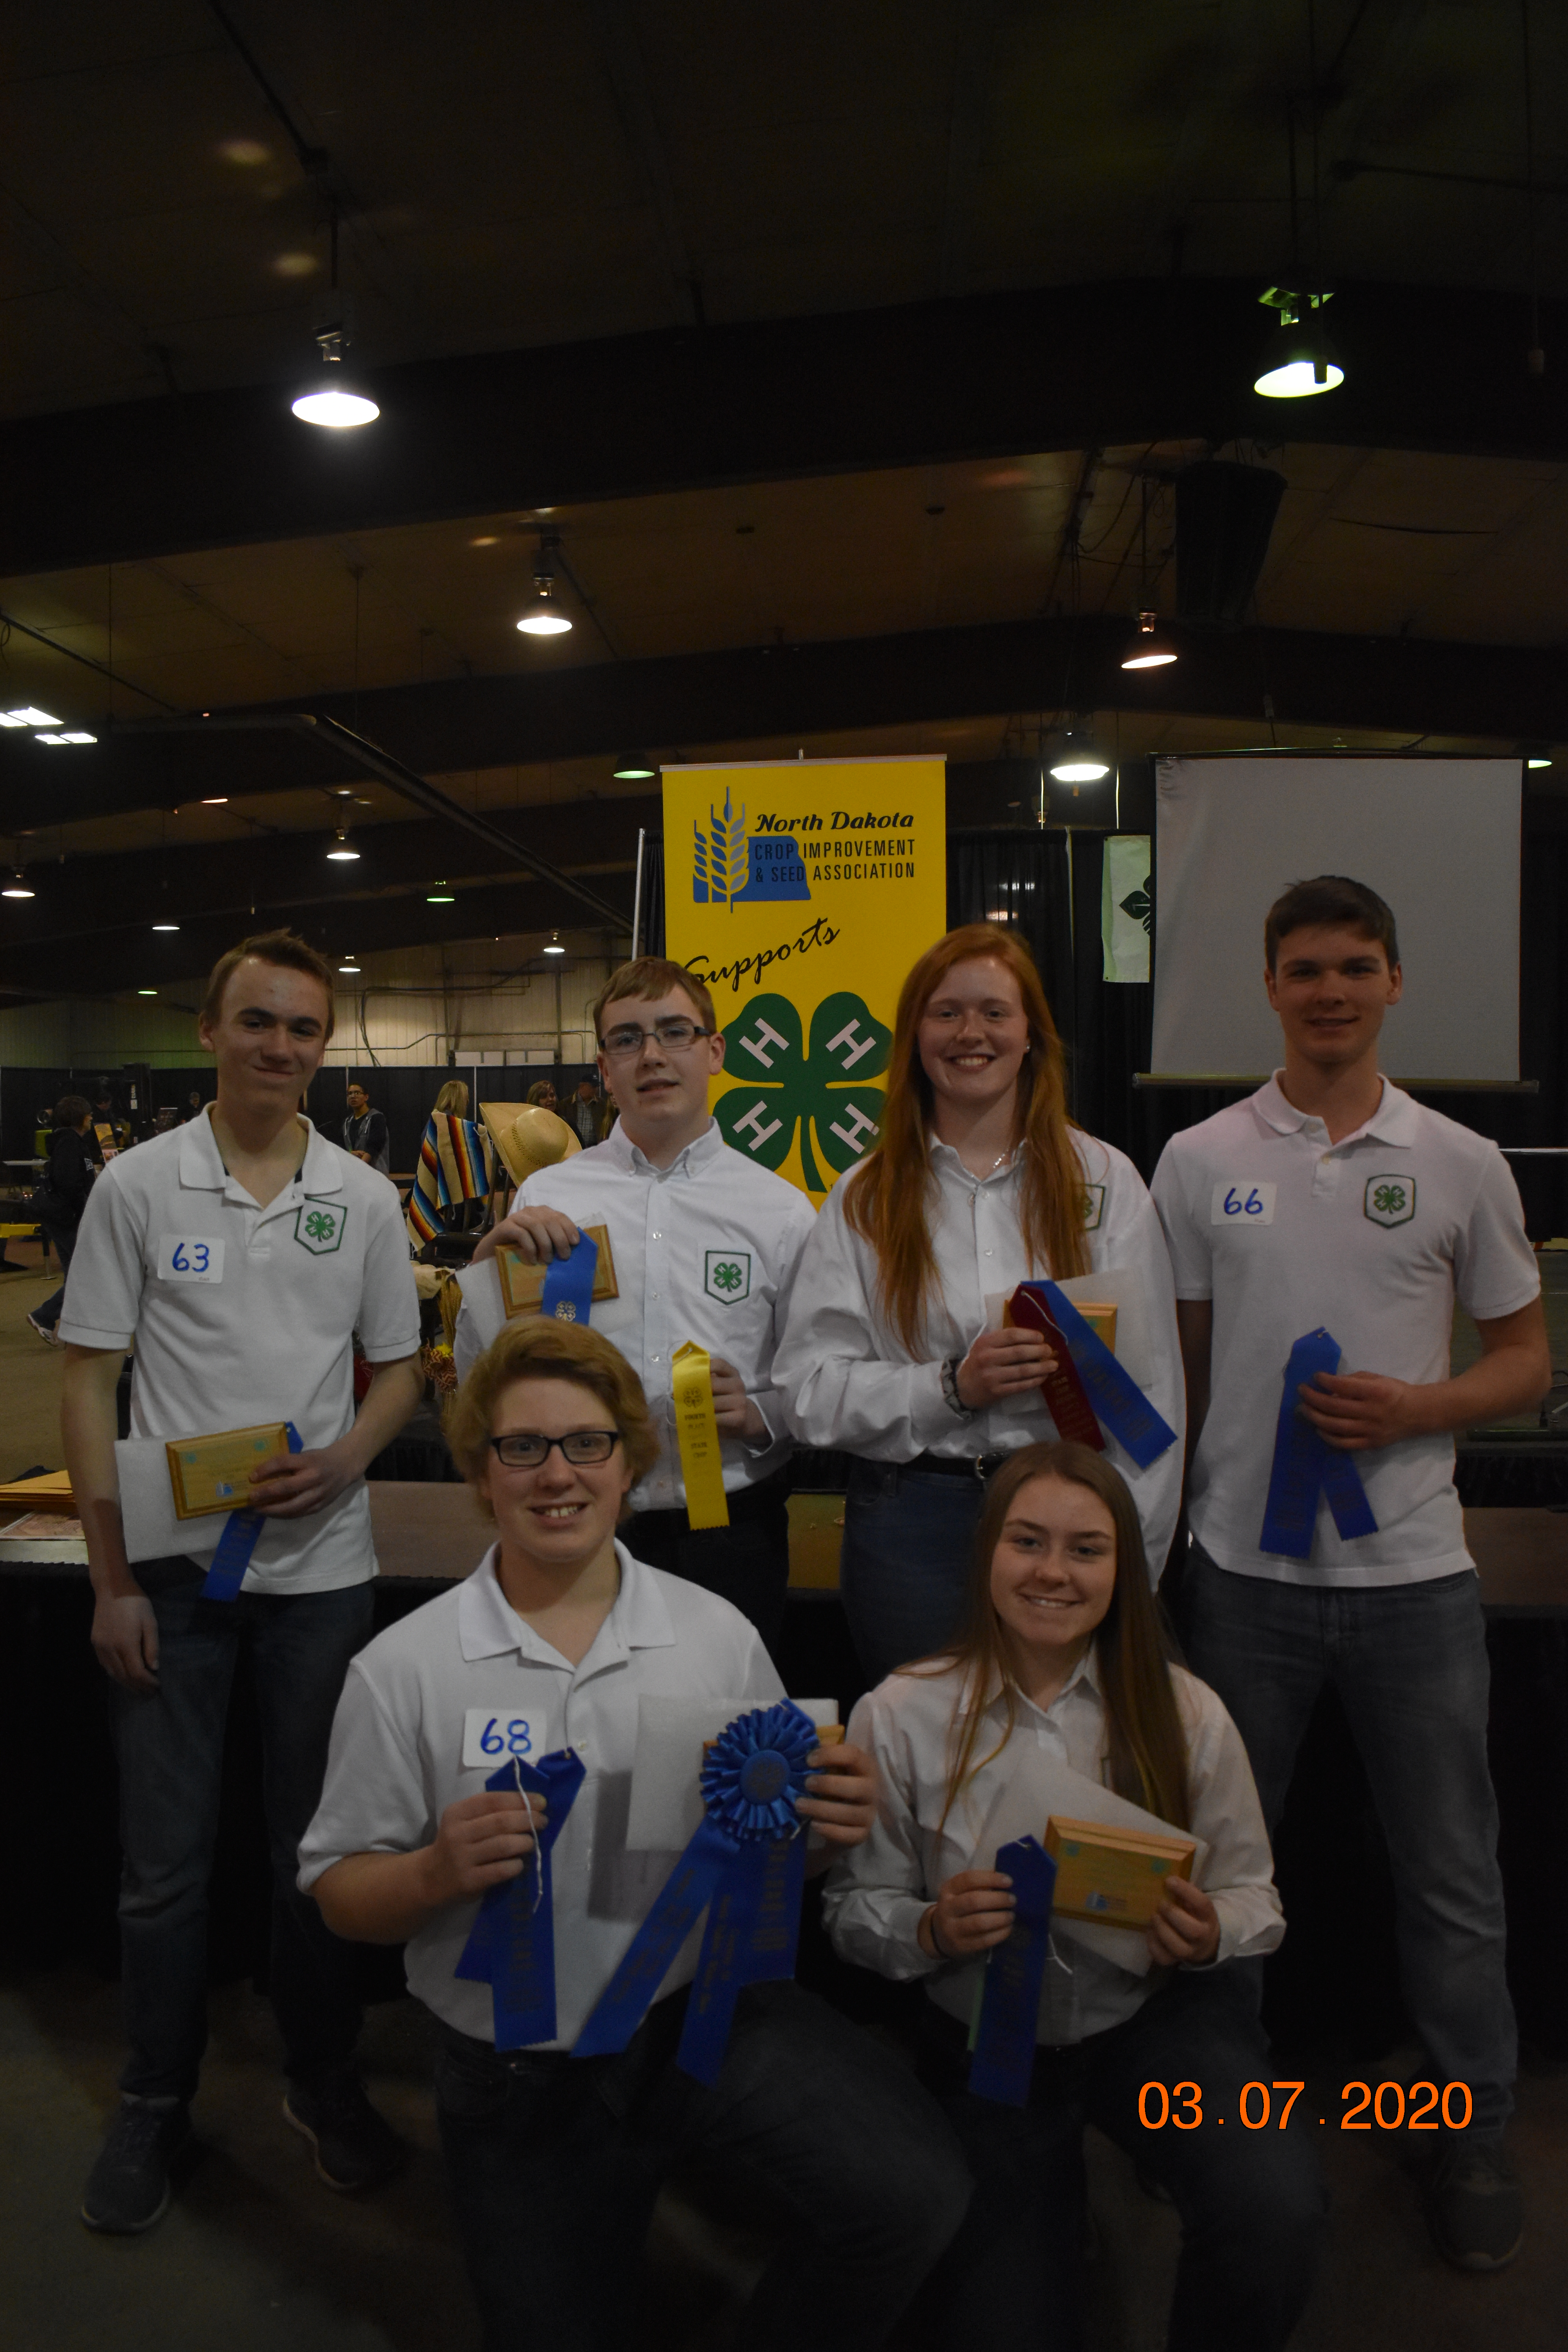 The Grand Forks County team placed first in the senior division of the North Dakota state 4-H crop judging contest. Pictured are (back row, from left): Evan Coles, William Stover, Jennifer Schneibel and Ryan Juve; (front row, from left): Isaak McHugo and Emily McHugo. (NDSU photo)